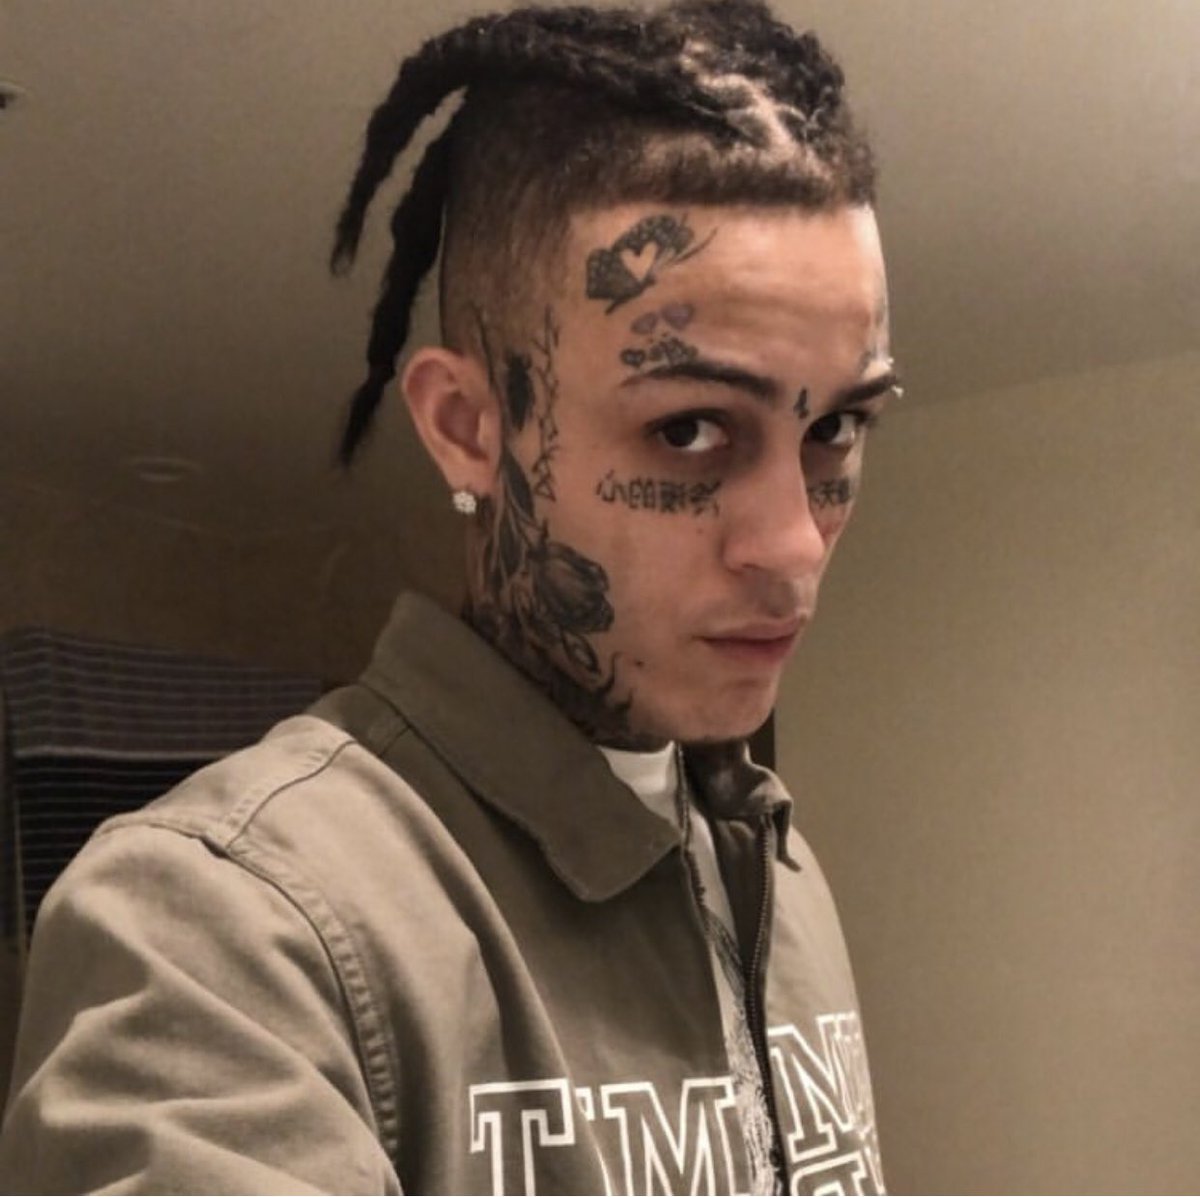 HIP HOP UPDATES on Twitter "Lil Skies announces that he has a son on